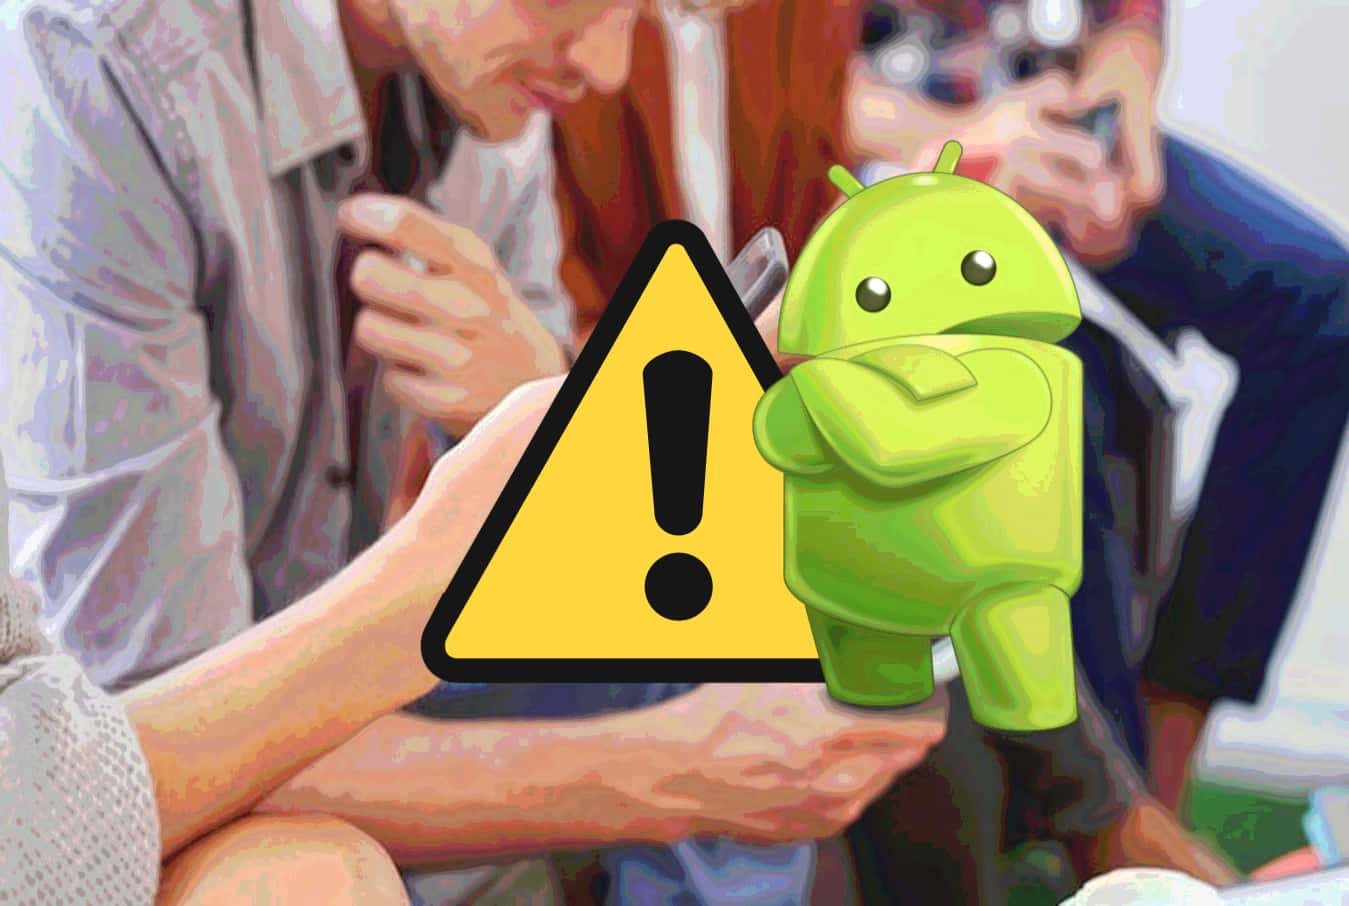 New Android trojan targets banking apps & threatens 2FA/SMS